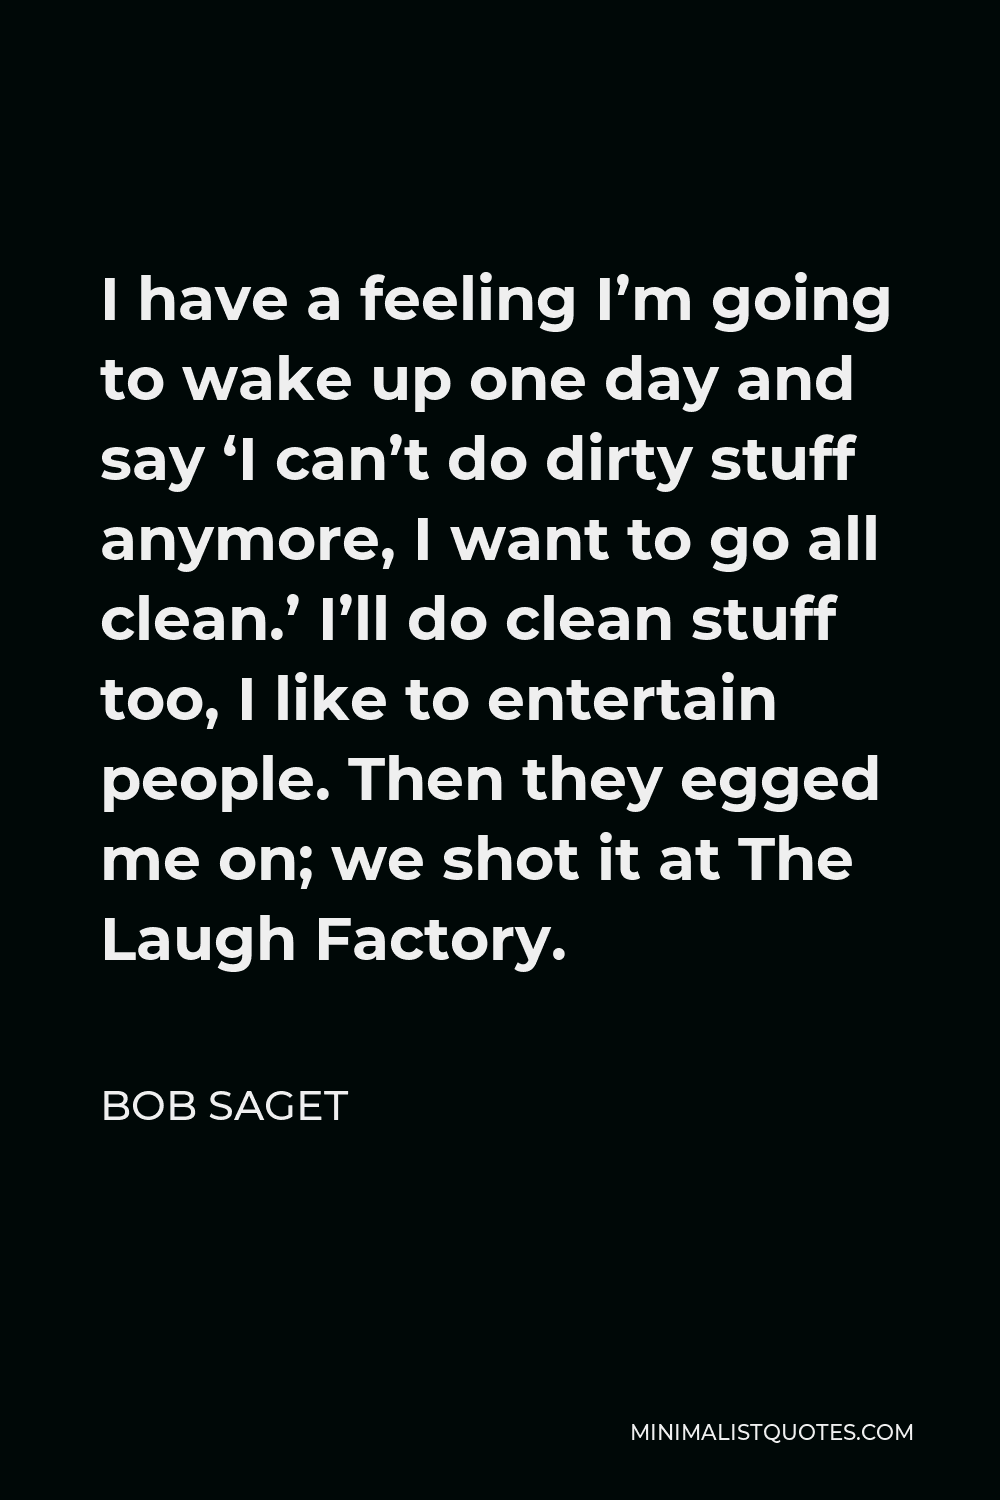 Bob Saget Quote - I have a feeling I’m going to wake up one day and say ‘I can’t do dirty stuff anymore, I want to go all clean.’ I’ll do clean stuff too, I like to entertain people. Then they egged me on; we shot it at The Laugh Factory.